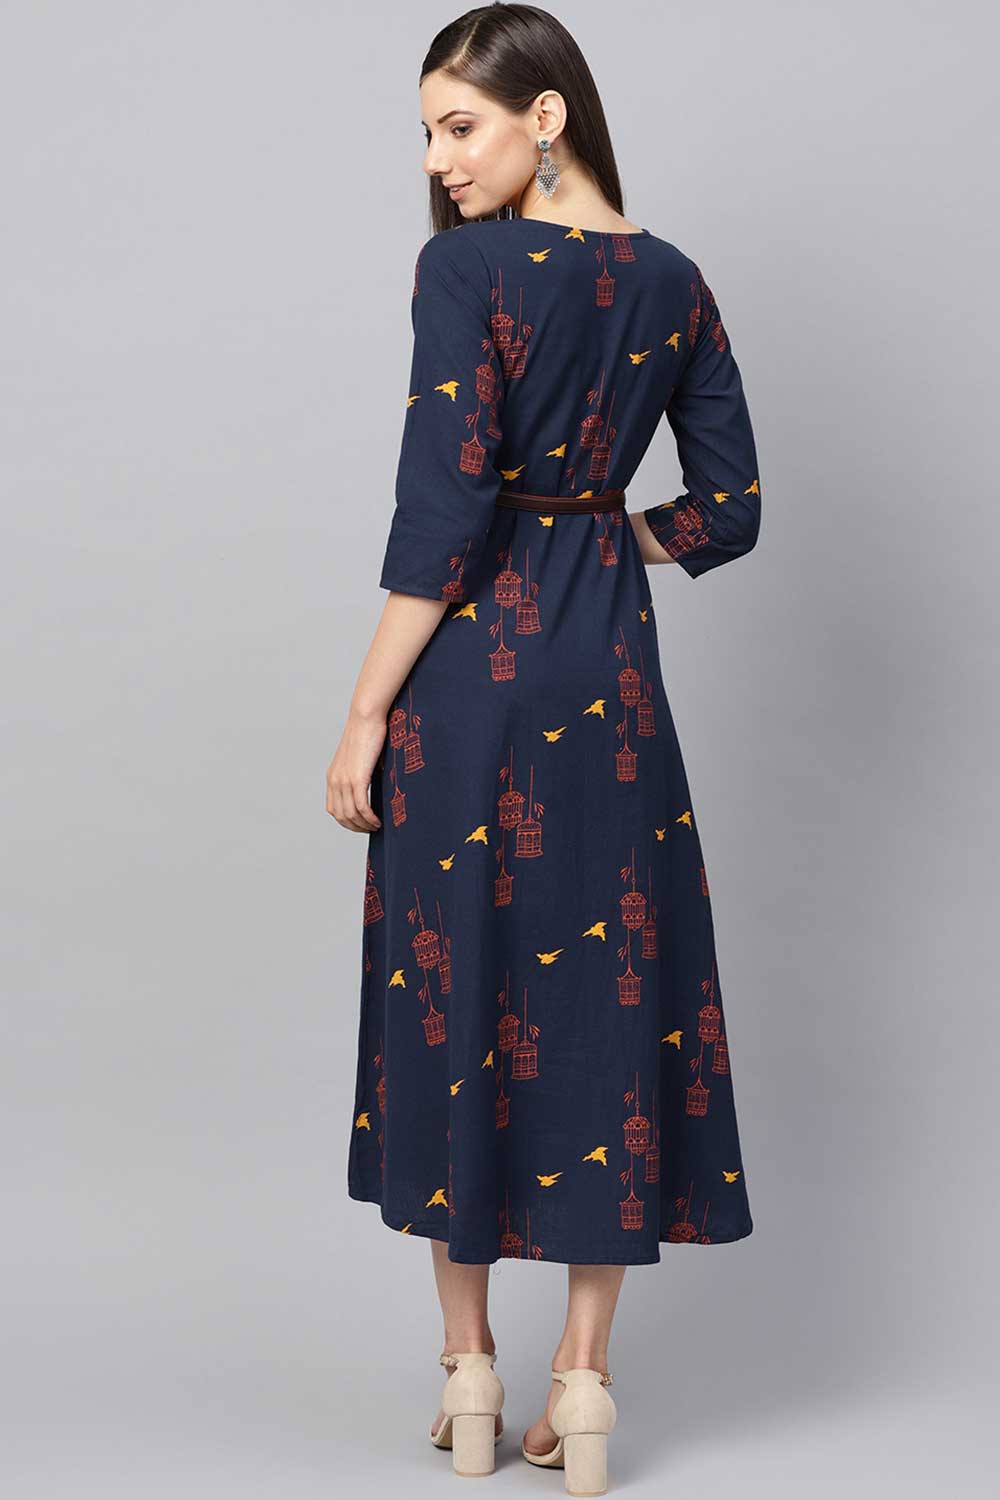 Buy Blended Cotton Abstract Printed Dress in Navy Blue Online - Front